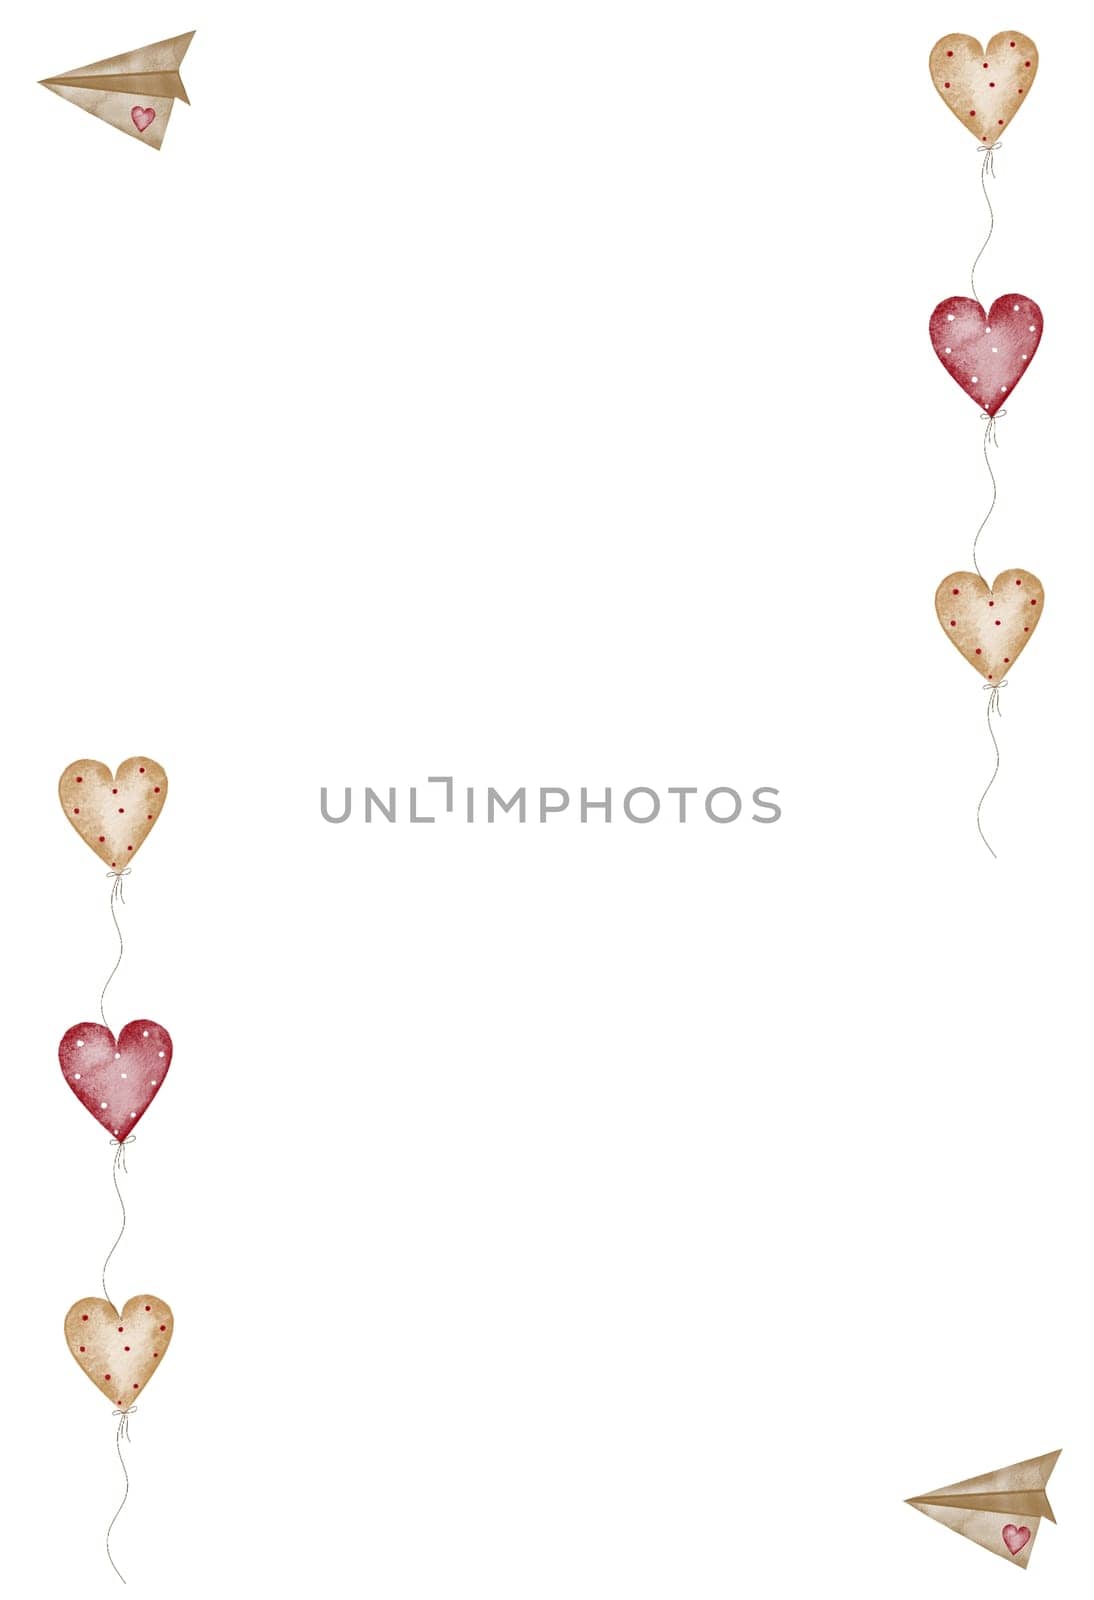 Watercolor Valentine's Day card template with little hearts and airplanes. Elegant and minimalistic style for decorating cards and invitations for holidays. High quality illustration